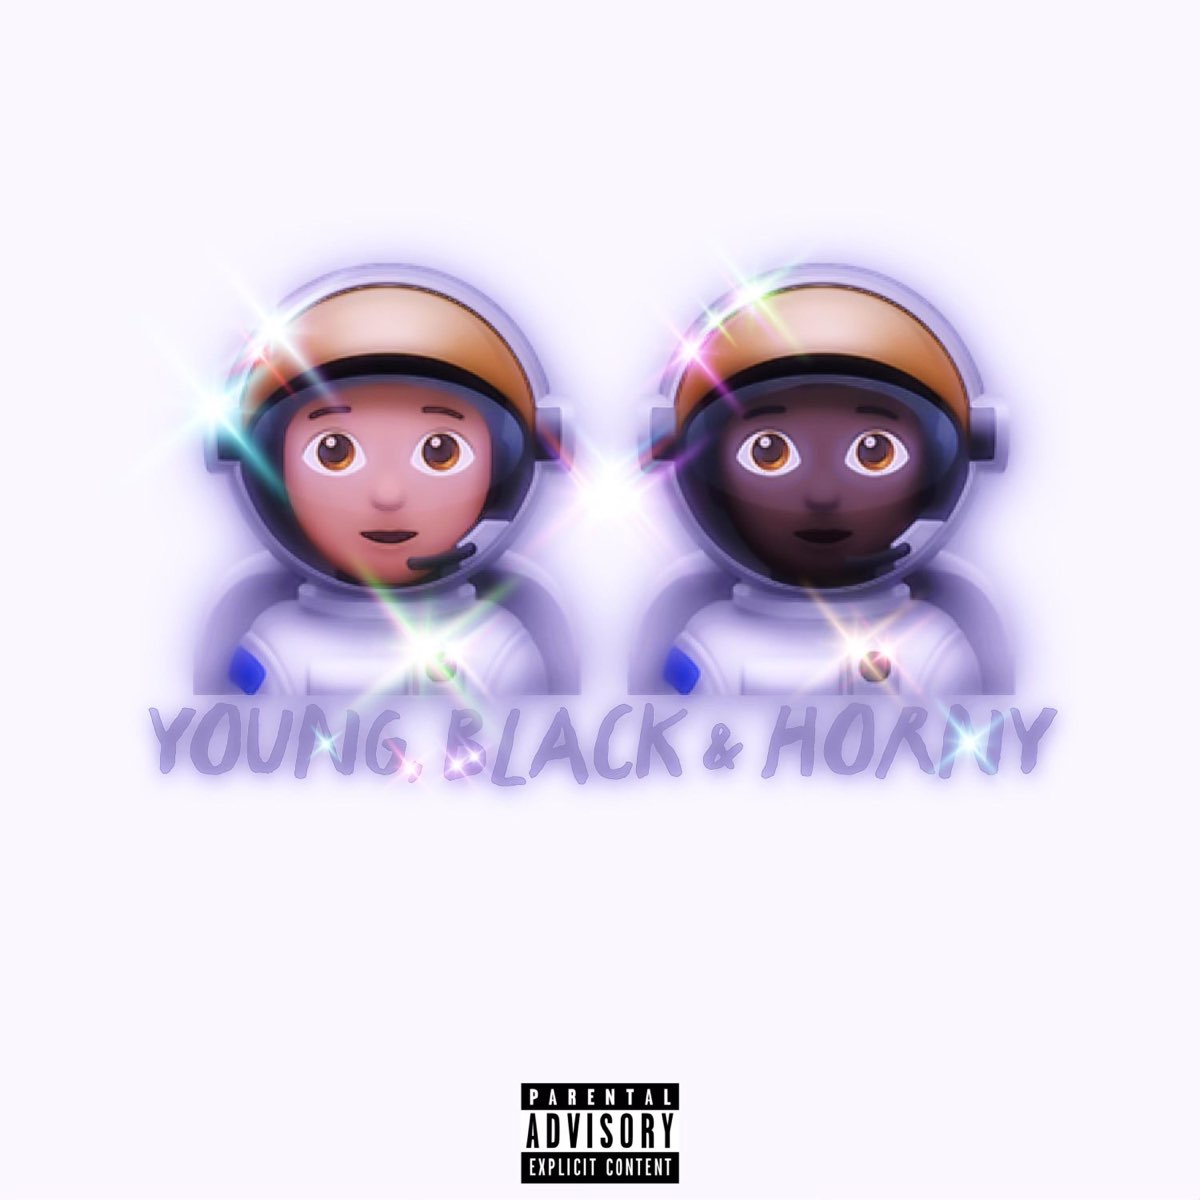 Young black and horny